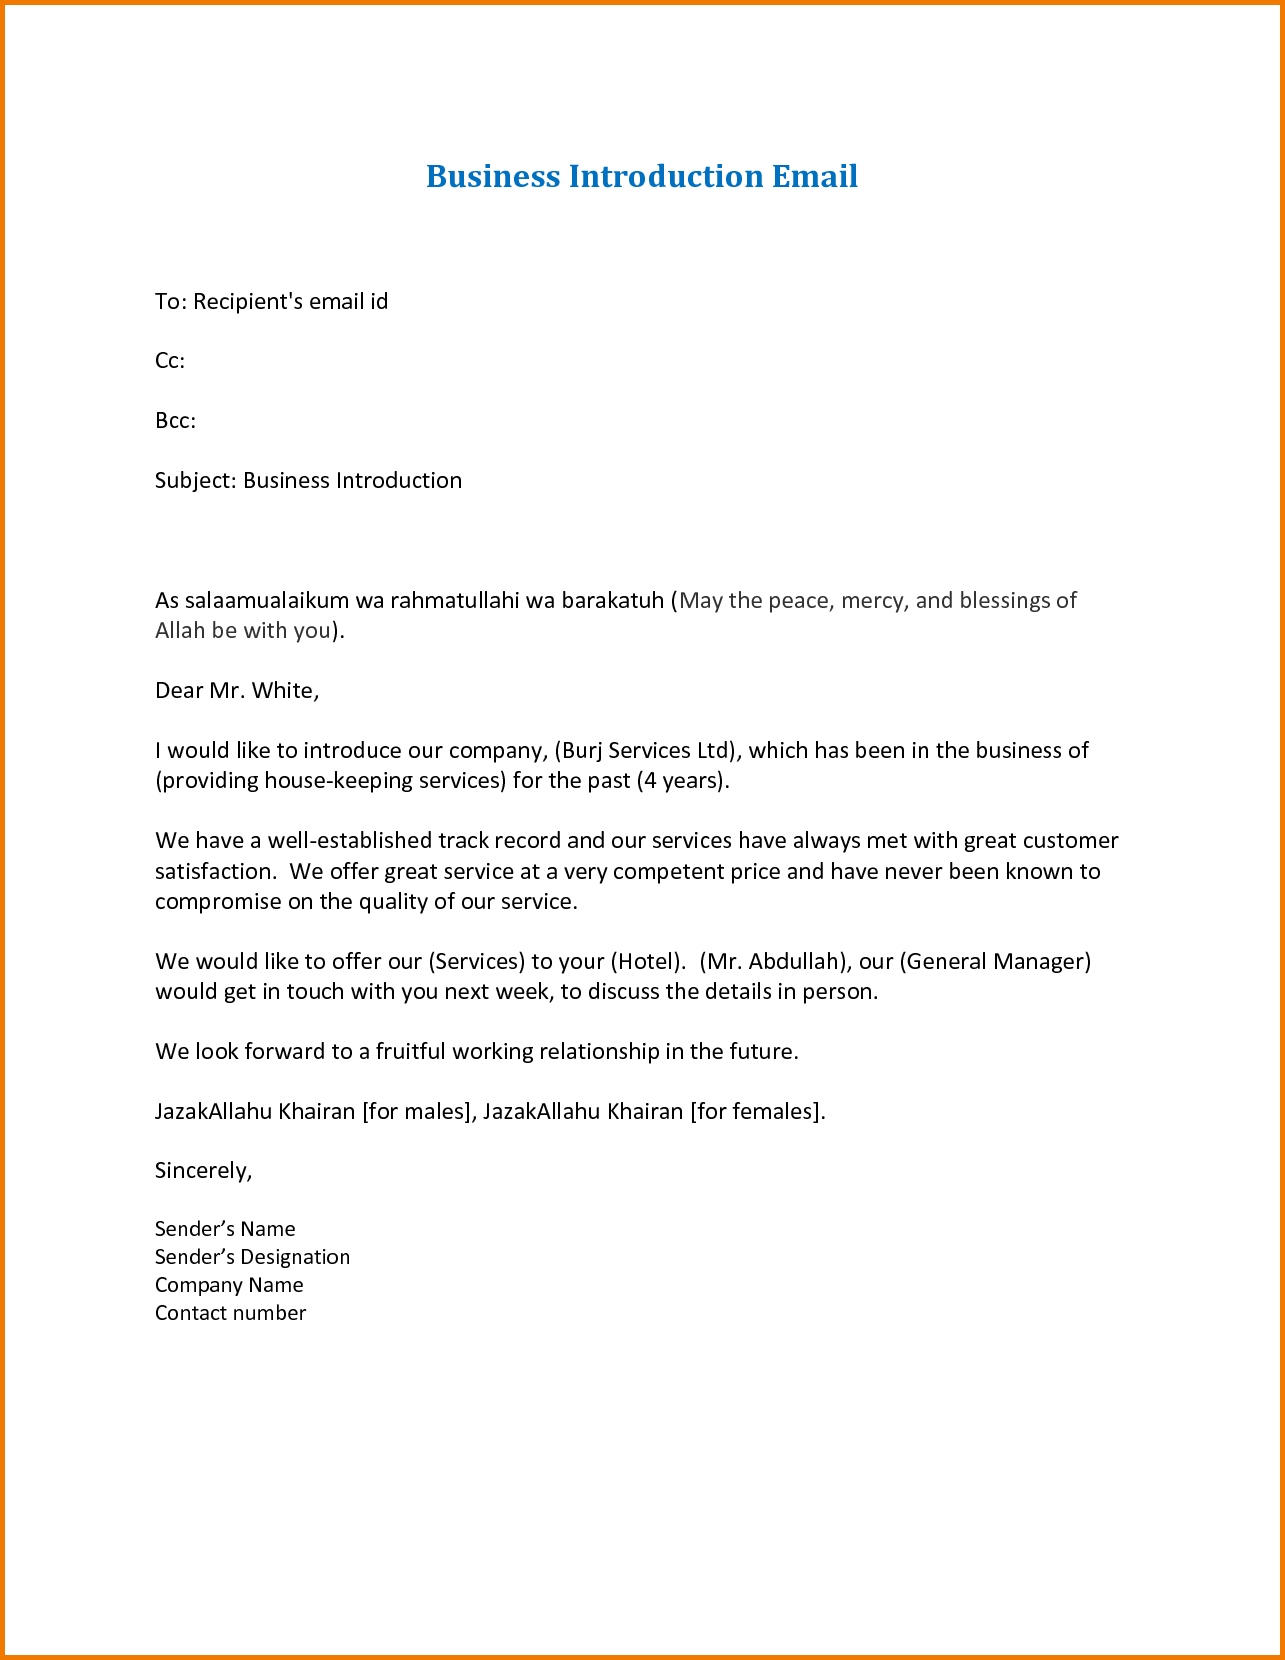 Company Introduction Email Template Letter Civil Contractor Formal throughout New Business Introduction Email Template